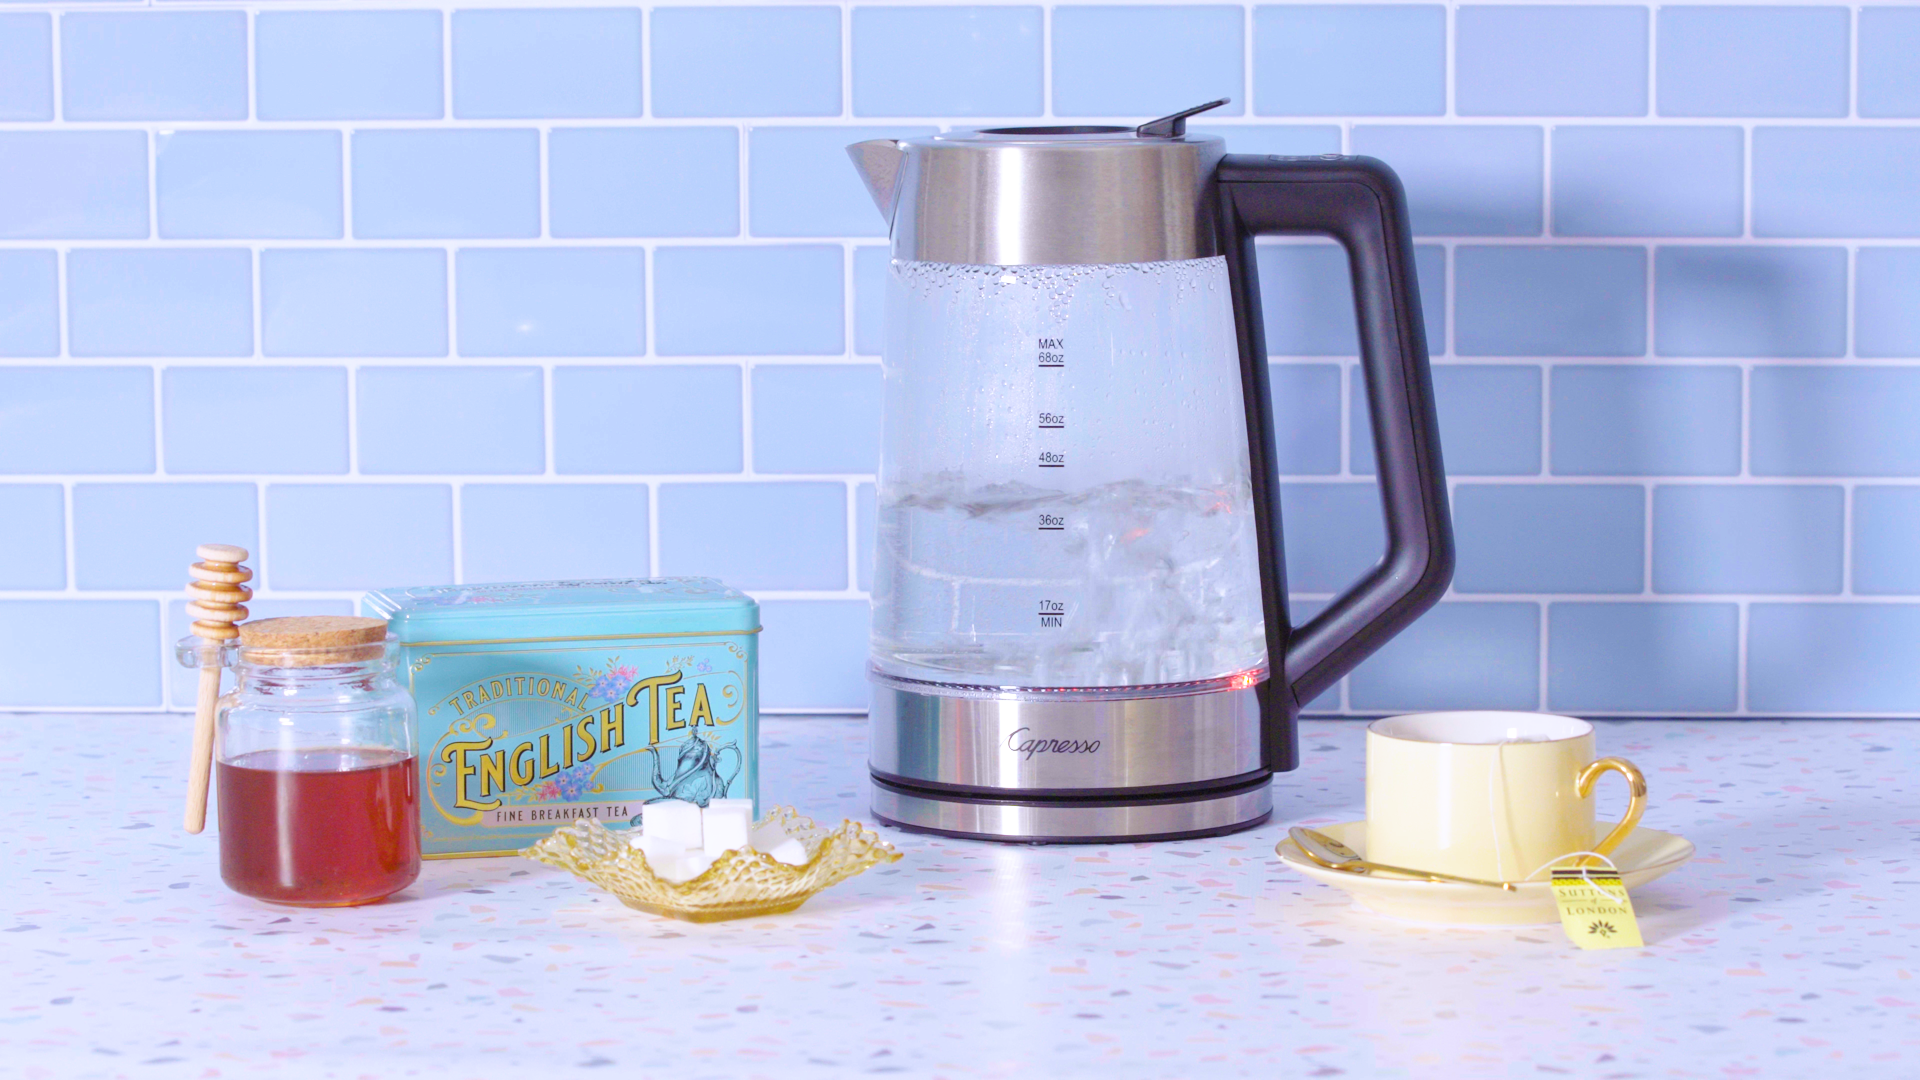 How to Clean an Electric Kettle: 5 Quick & Easy Ways